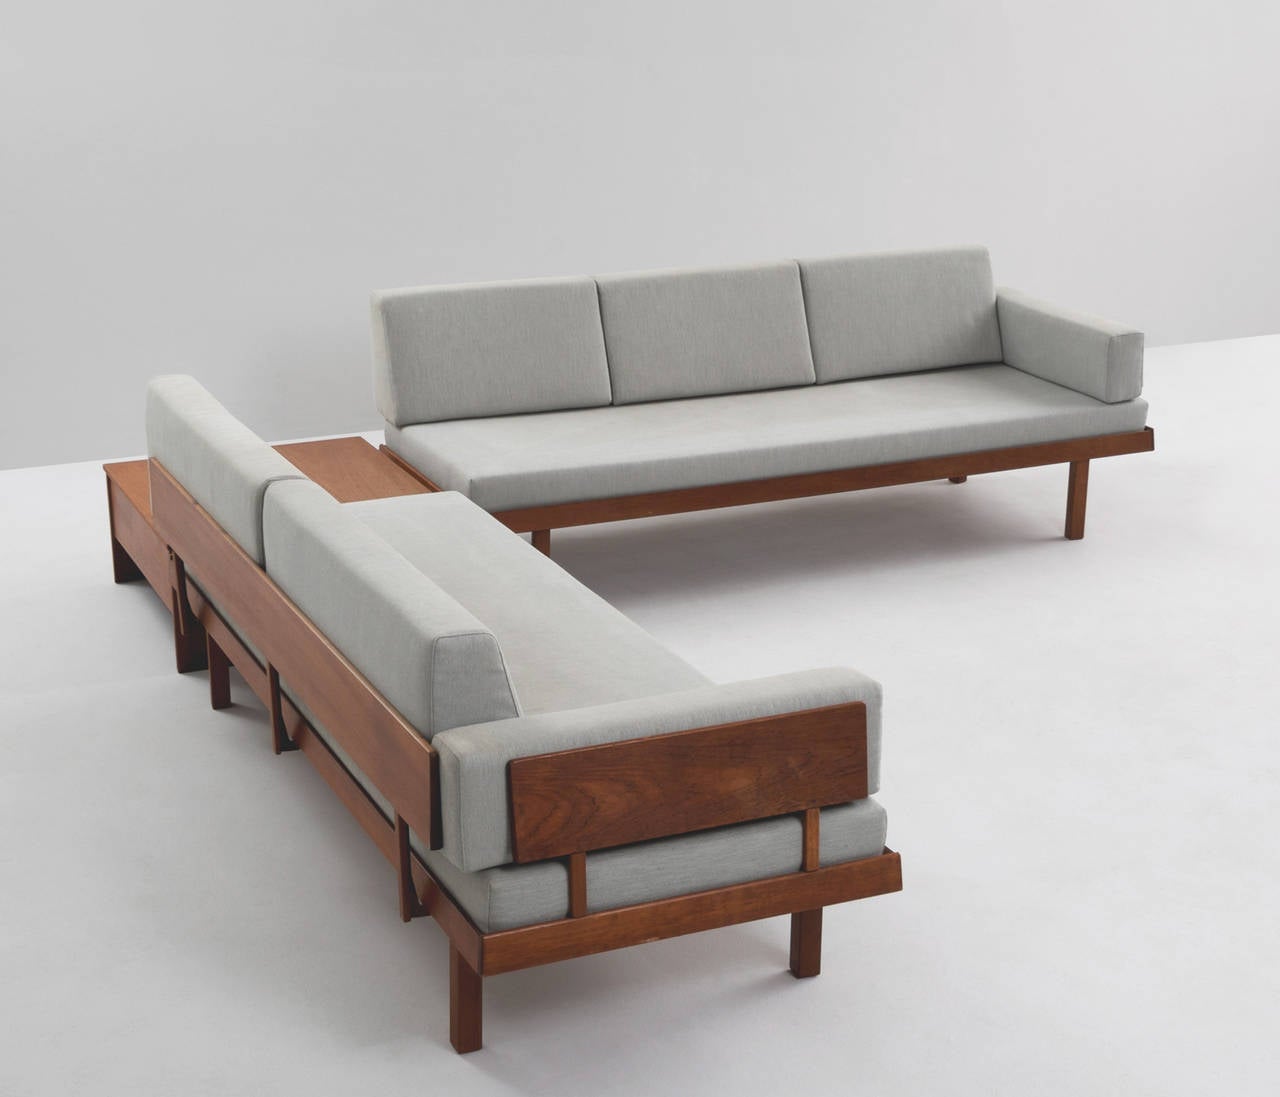 Living room set, in teak and fabric, Denmark, 1960s.

Well designed sofas from Danish manufacture. The frames are completely been made of solid teak. Due to the elegant slim legs and open expression from the backrests these sofas could fit any